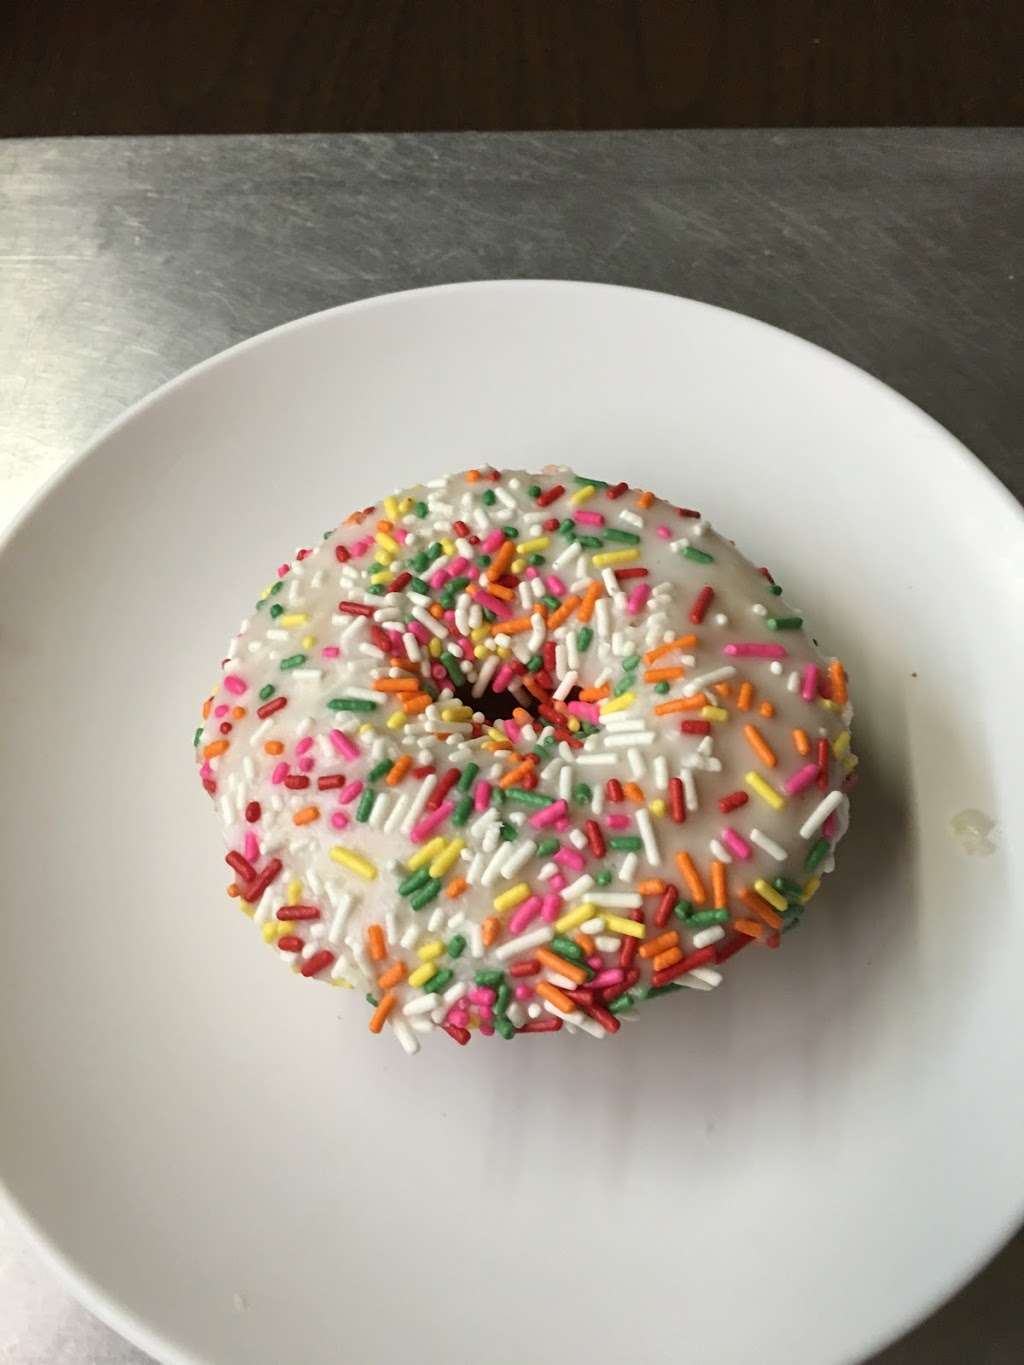 Tasty Donuts | 6441 E 72nd Pl, Commerce City, CO 80022, USA | Phone: (303) 288-9068